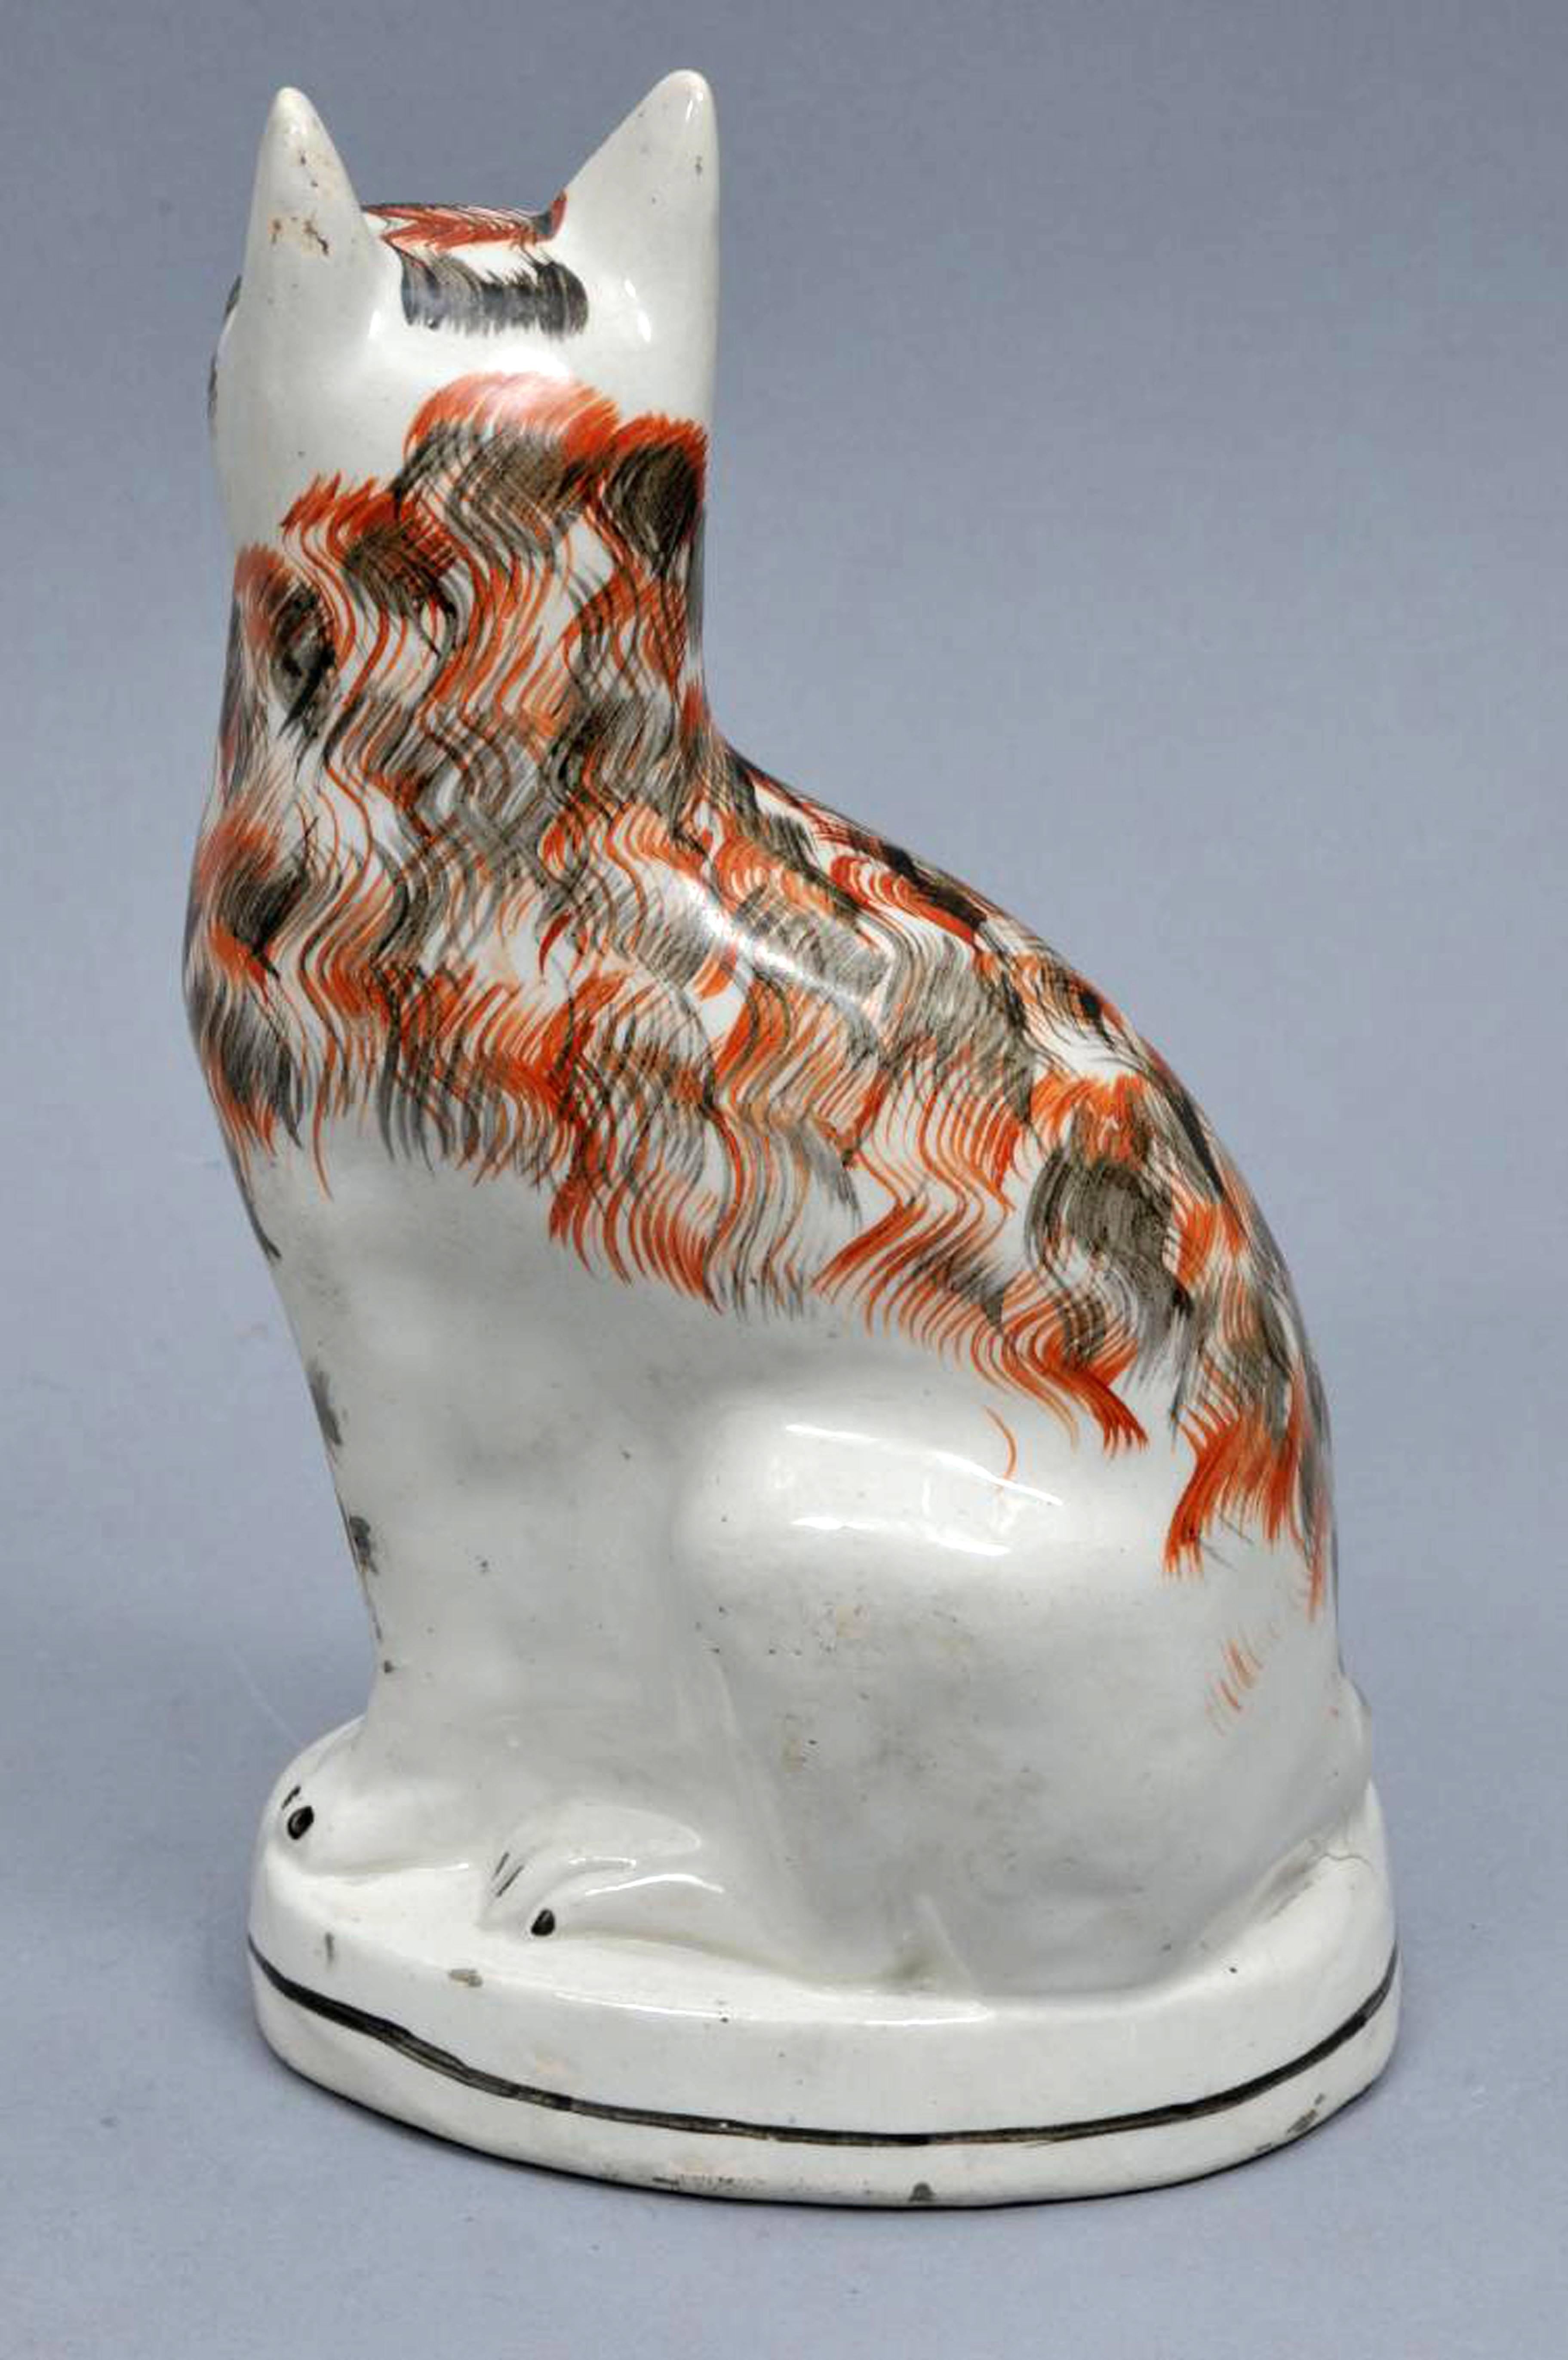 Staffordshire pottery cat, 
circa 1850.

The wonderful cat sits on an oval base on its hindquarters, its ears pricked and is painted whimsically with brown and red fur.

Dimensions: 10 1/2 inches high.